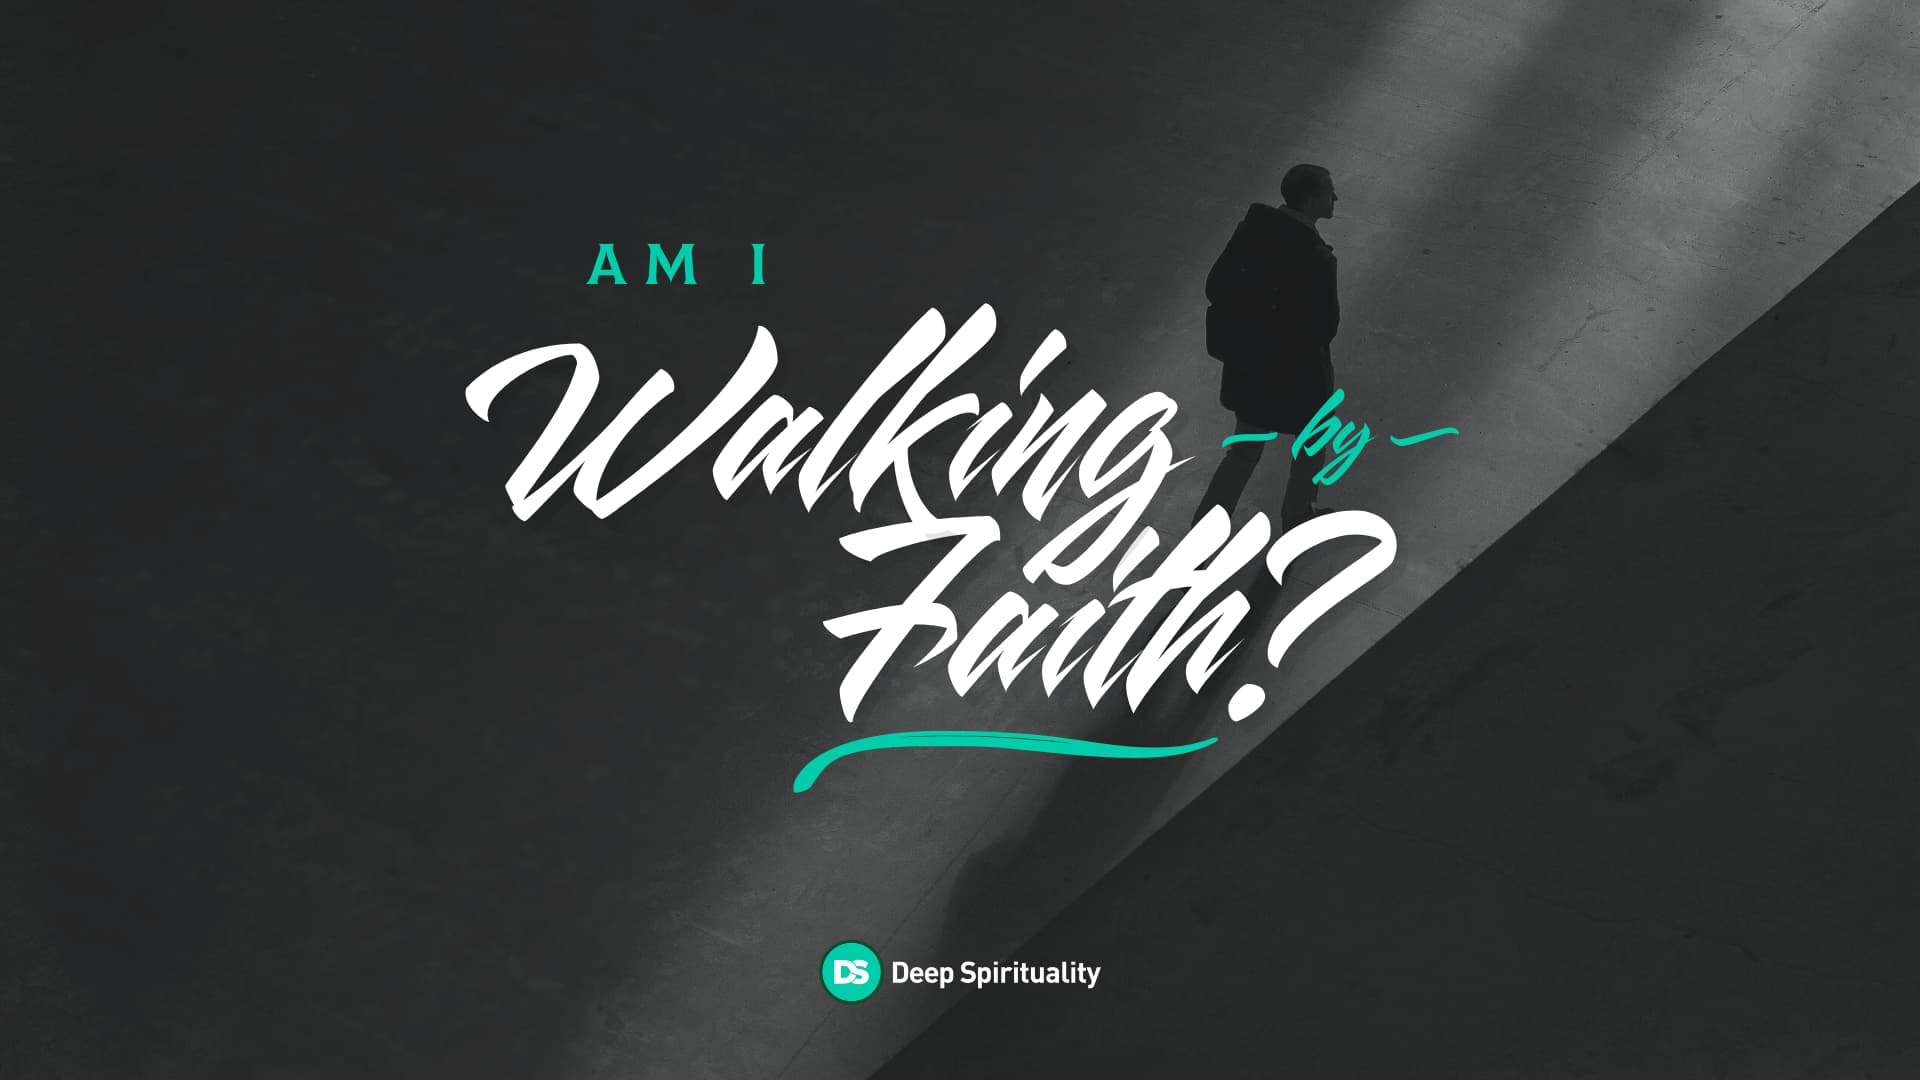 How Do I Know if I’m Walking by Faith? 1